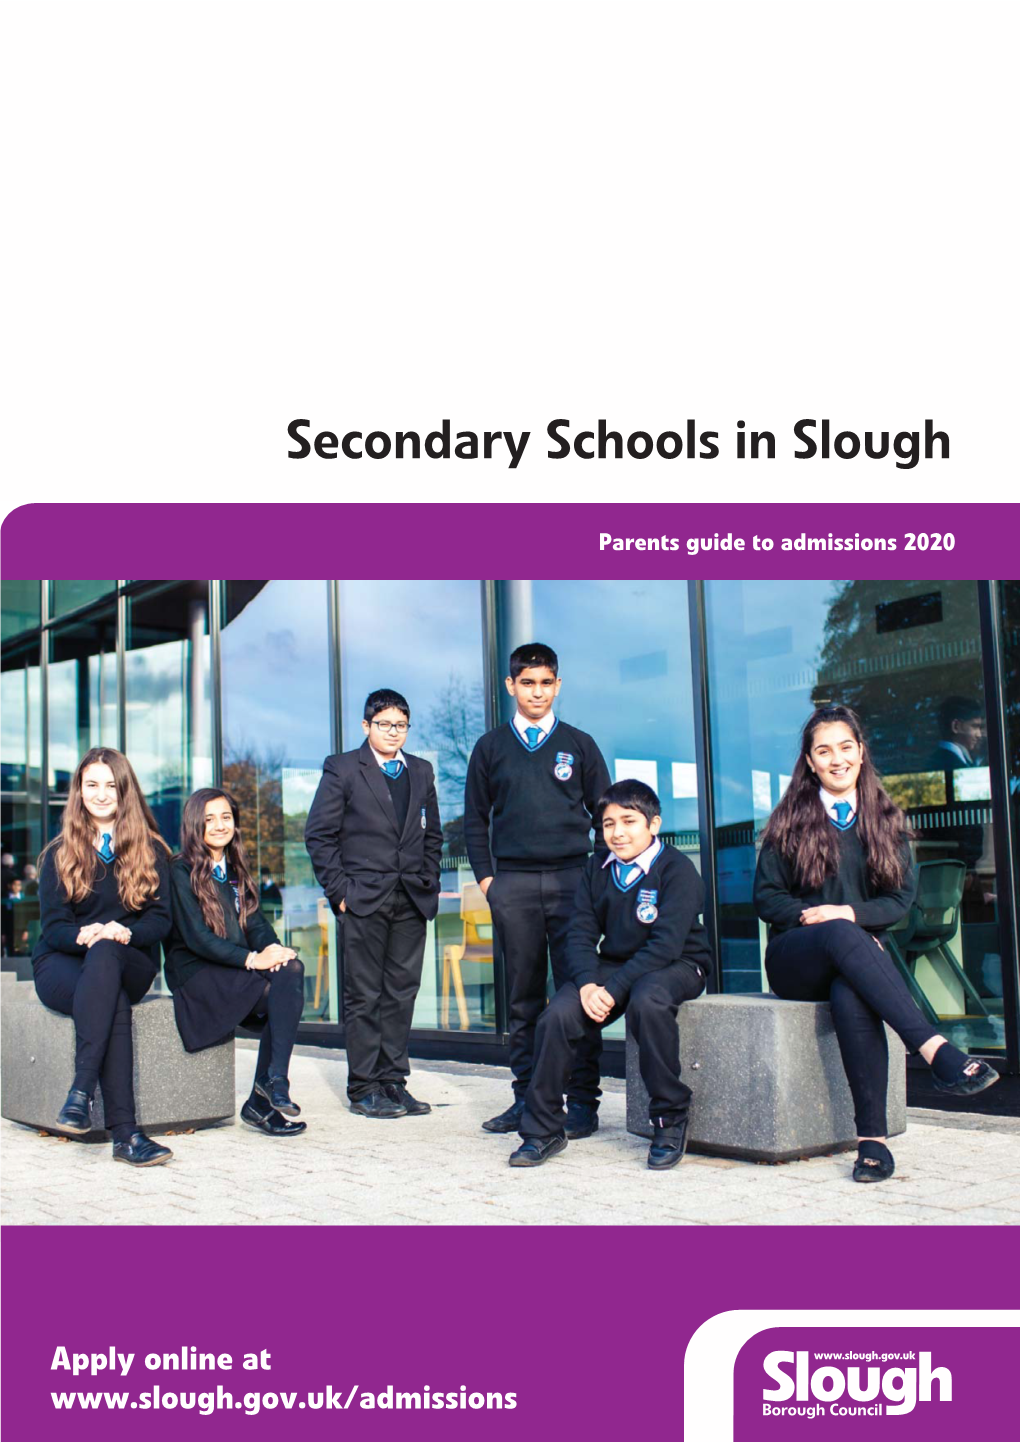 Secondary Schools in Slough